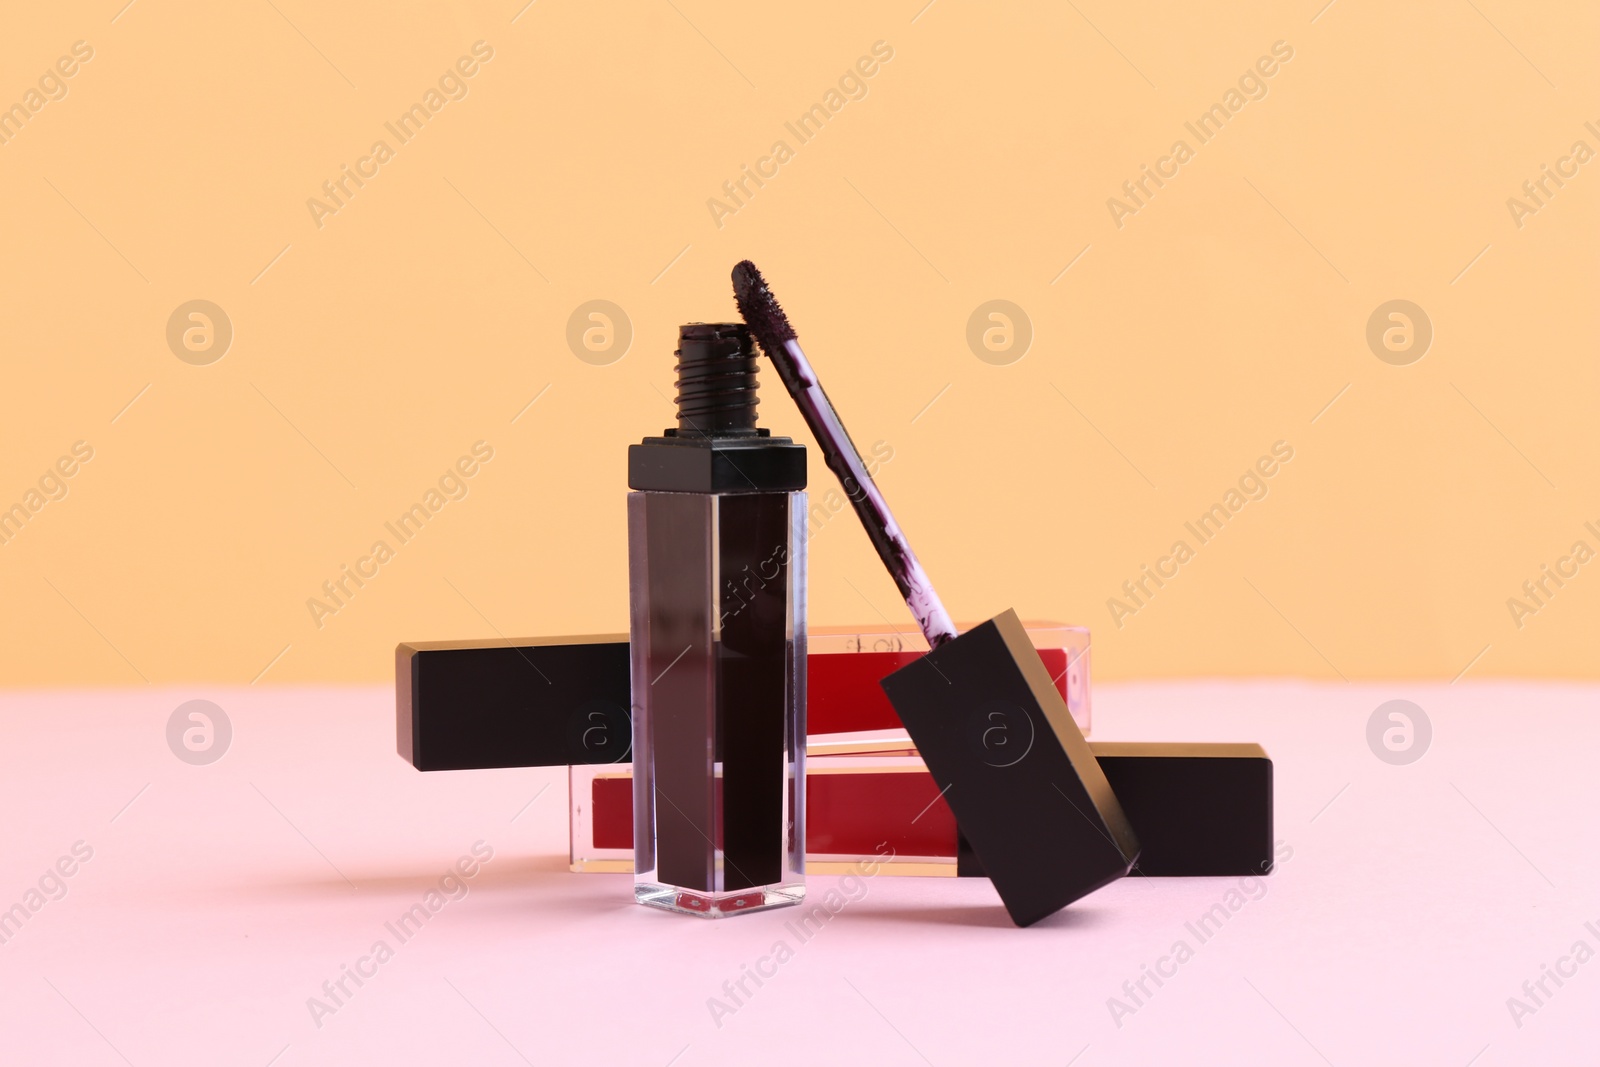 Photo of Different lip glosses and applicator on color background